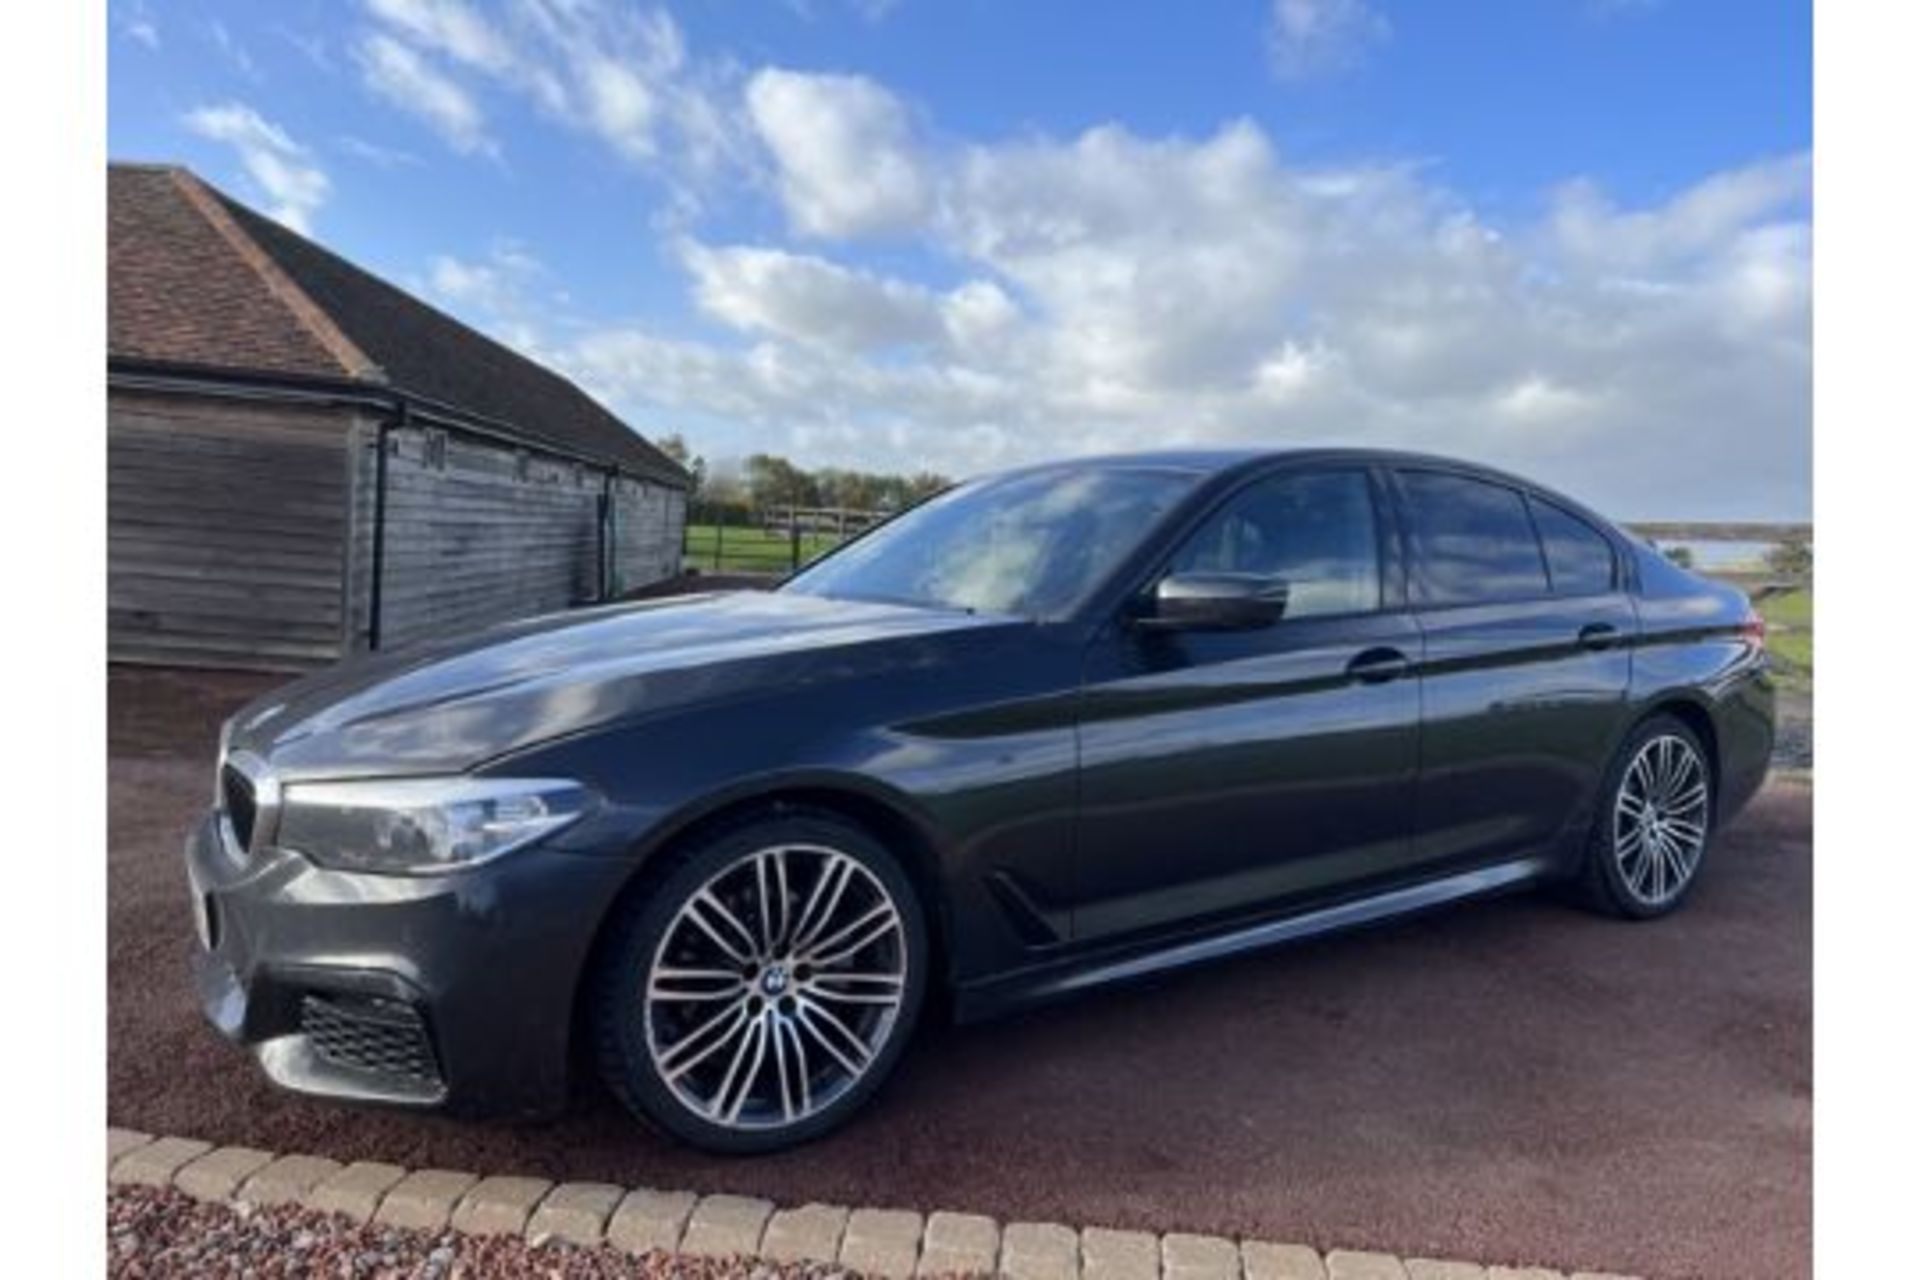 (RESERVE MET)BMW 5 Series 520D "M SPORT" Automatic 2019 19 Reg - Air Con - Full Leather - 63k Miles